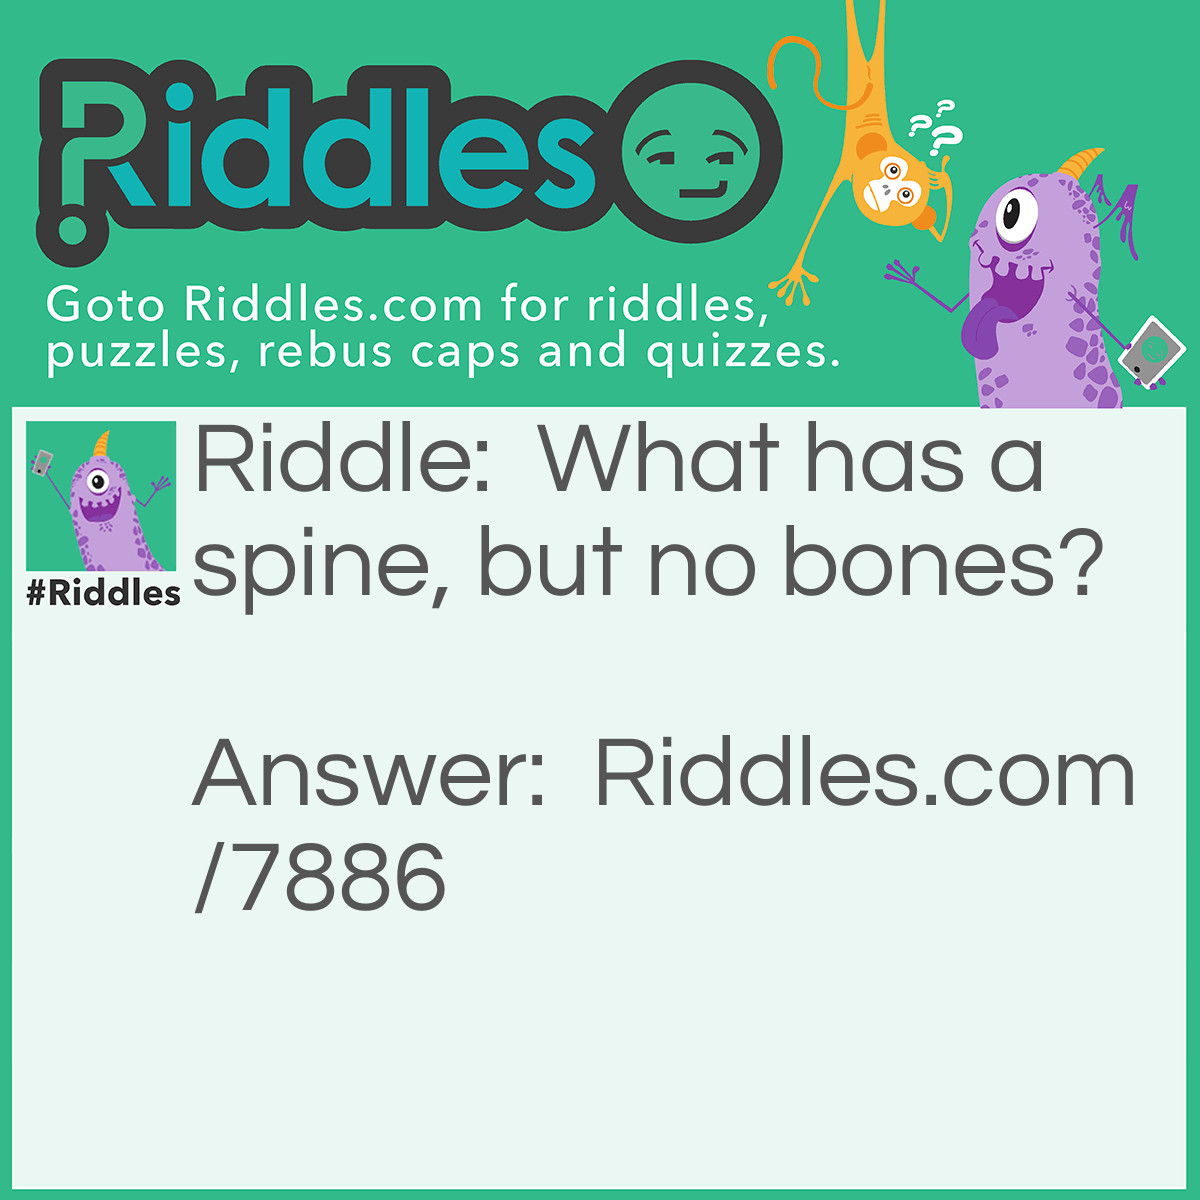 Riddle: What has a spine, but no bones? Answer: A book.